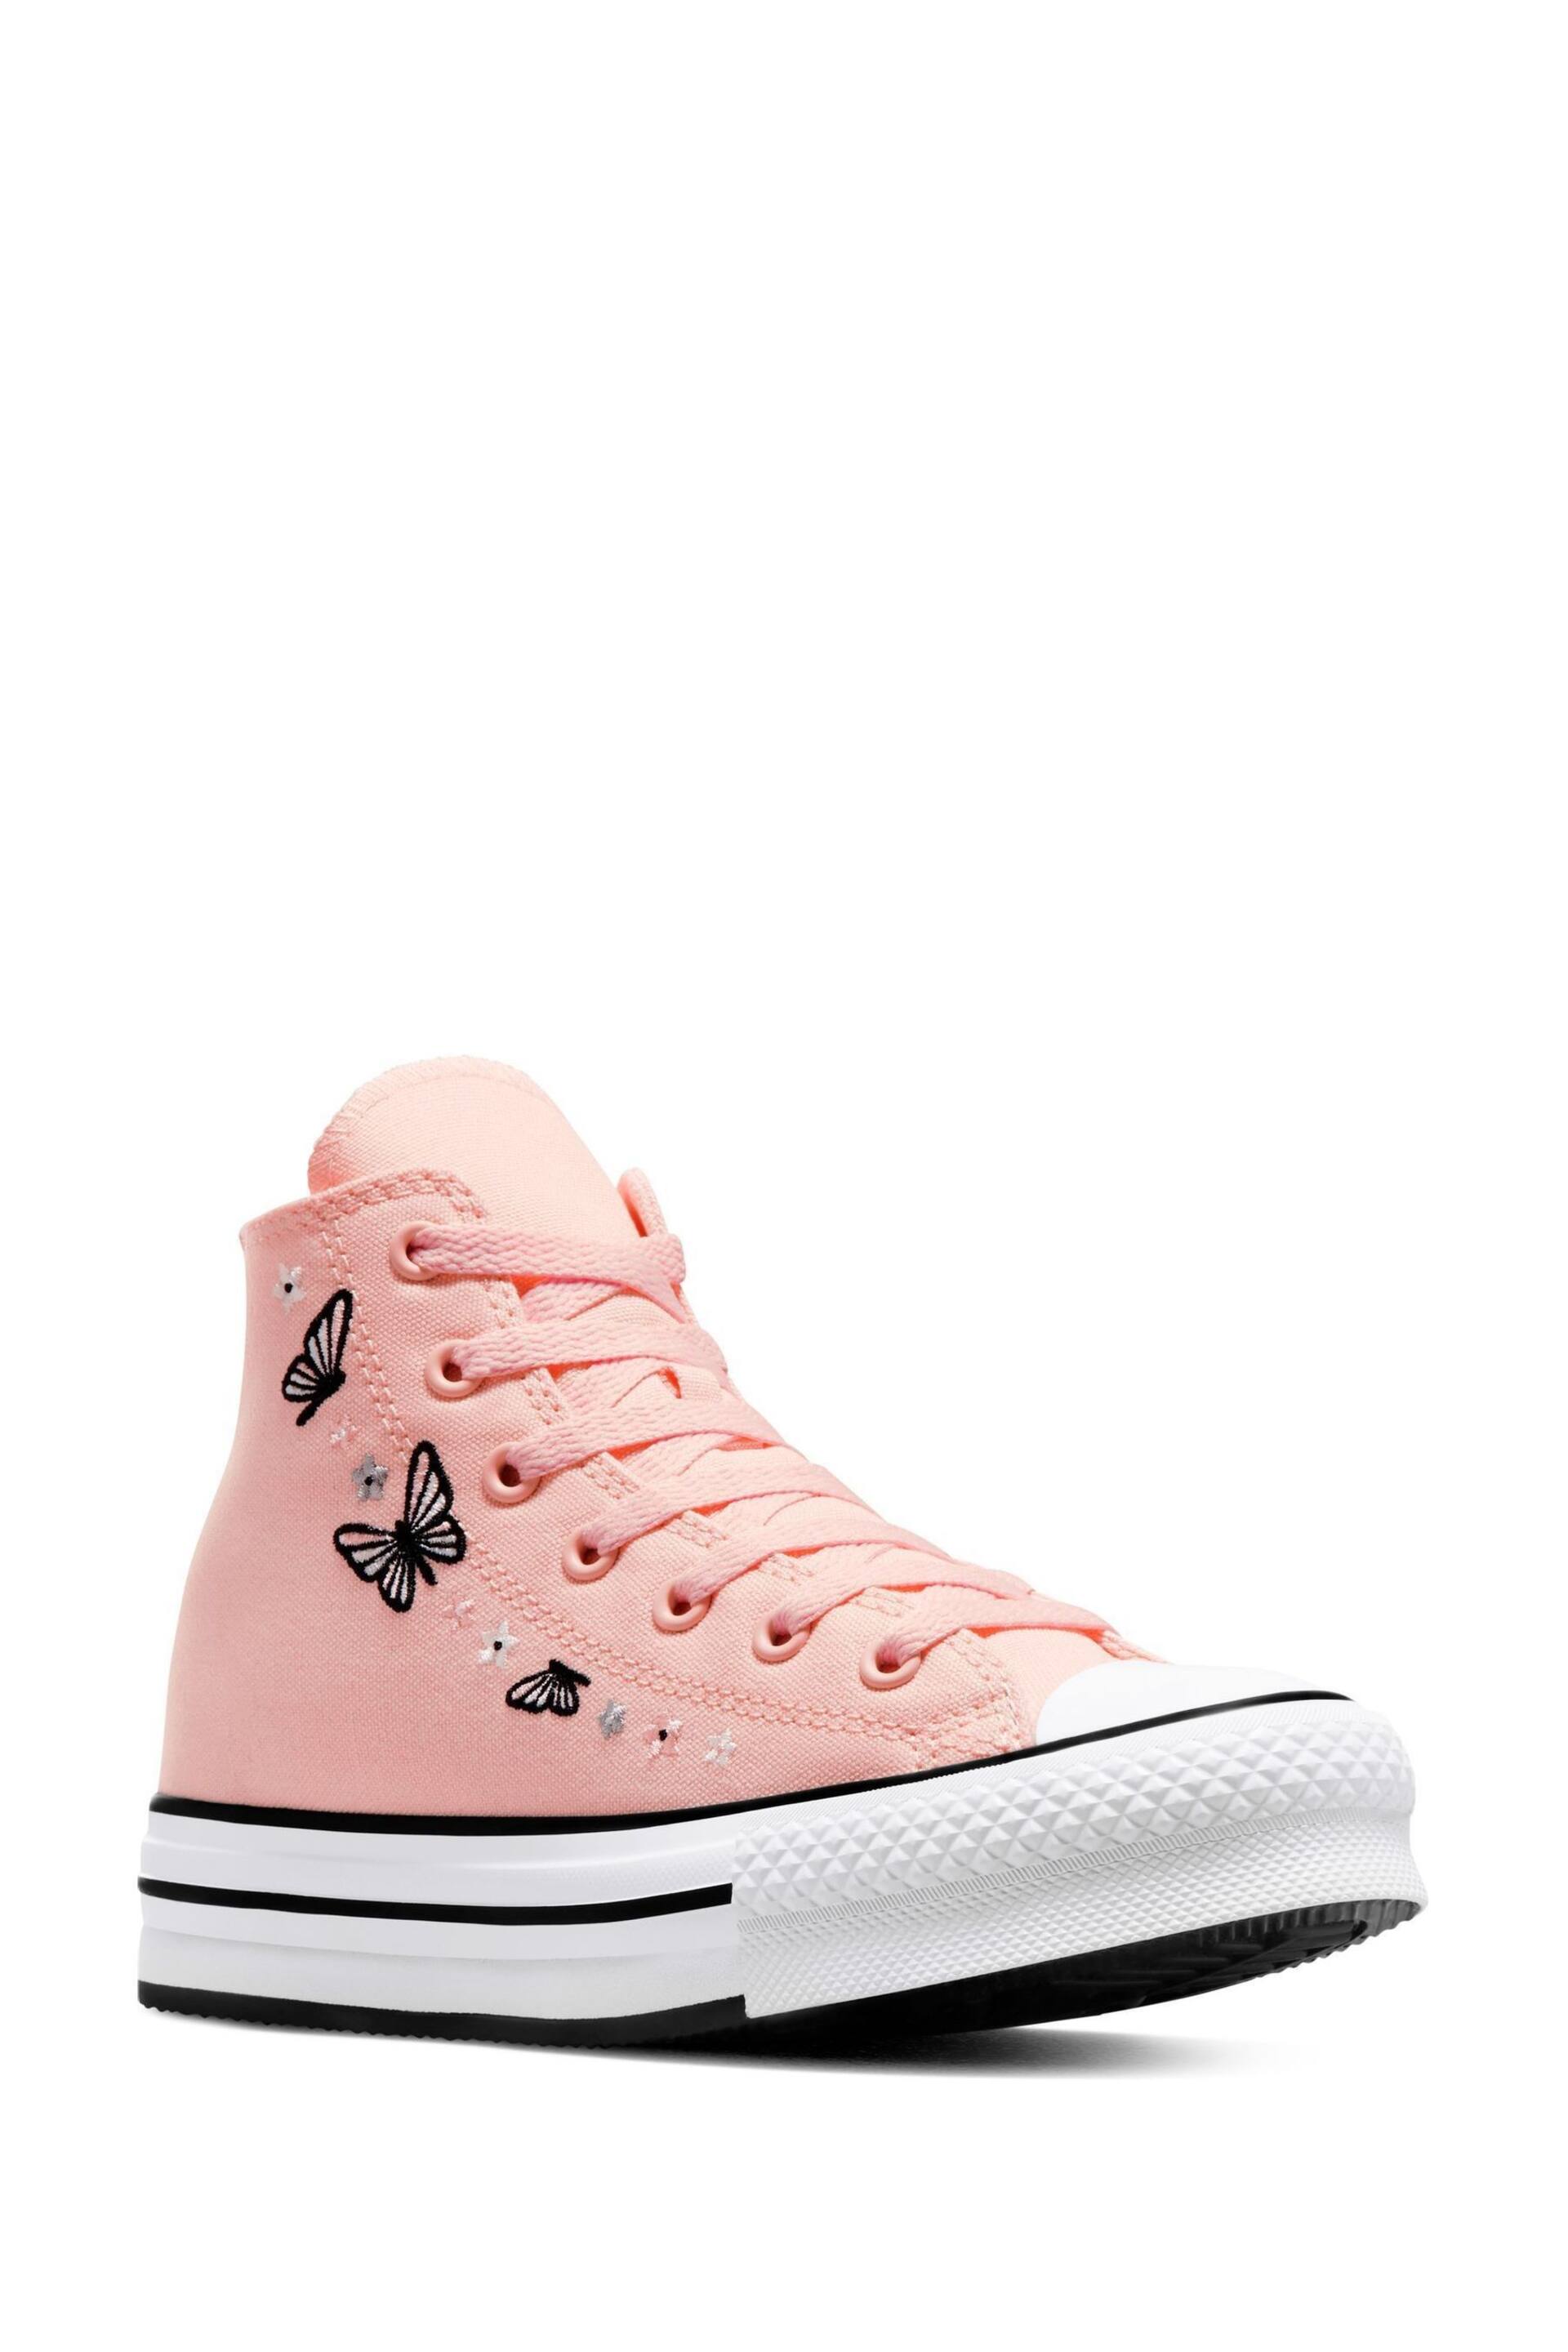 Converse Pink Butterfly Embroidered EVA Lift Youth Trainers - Image 4 of 9